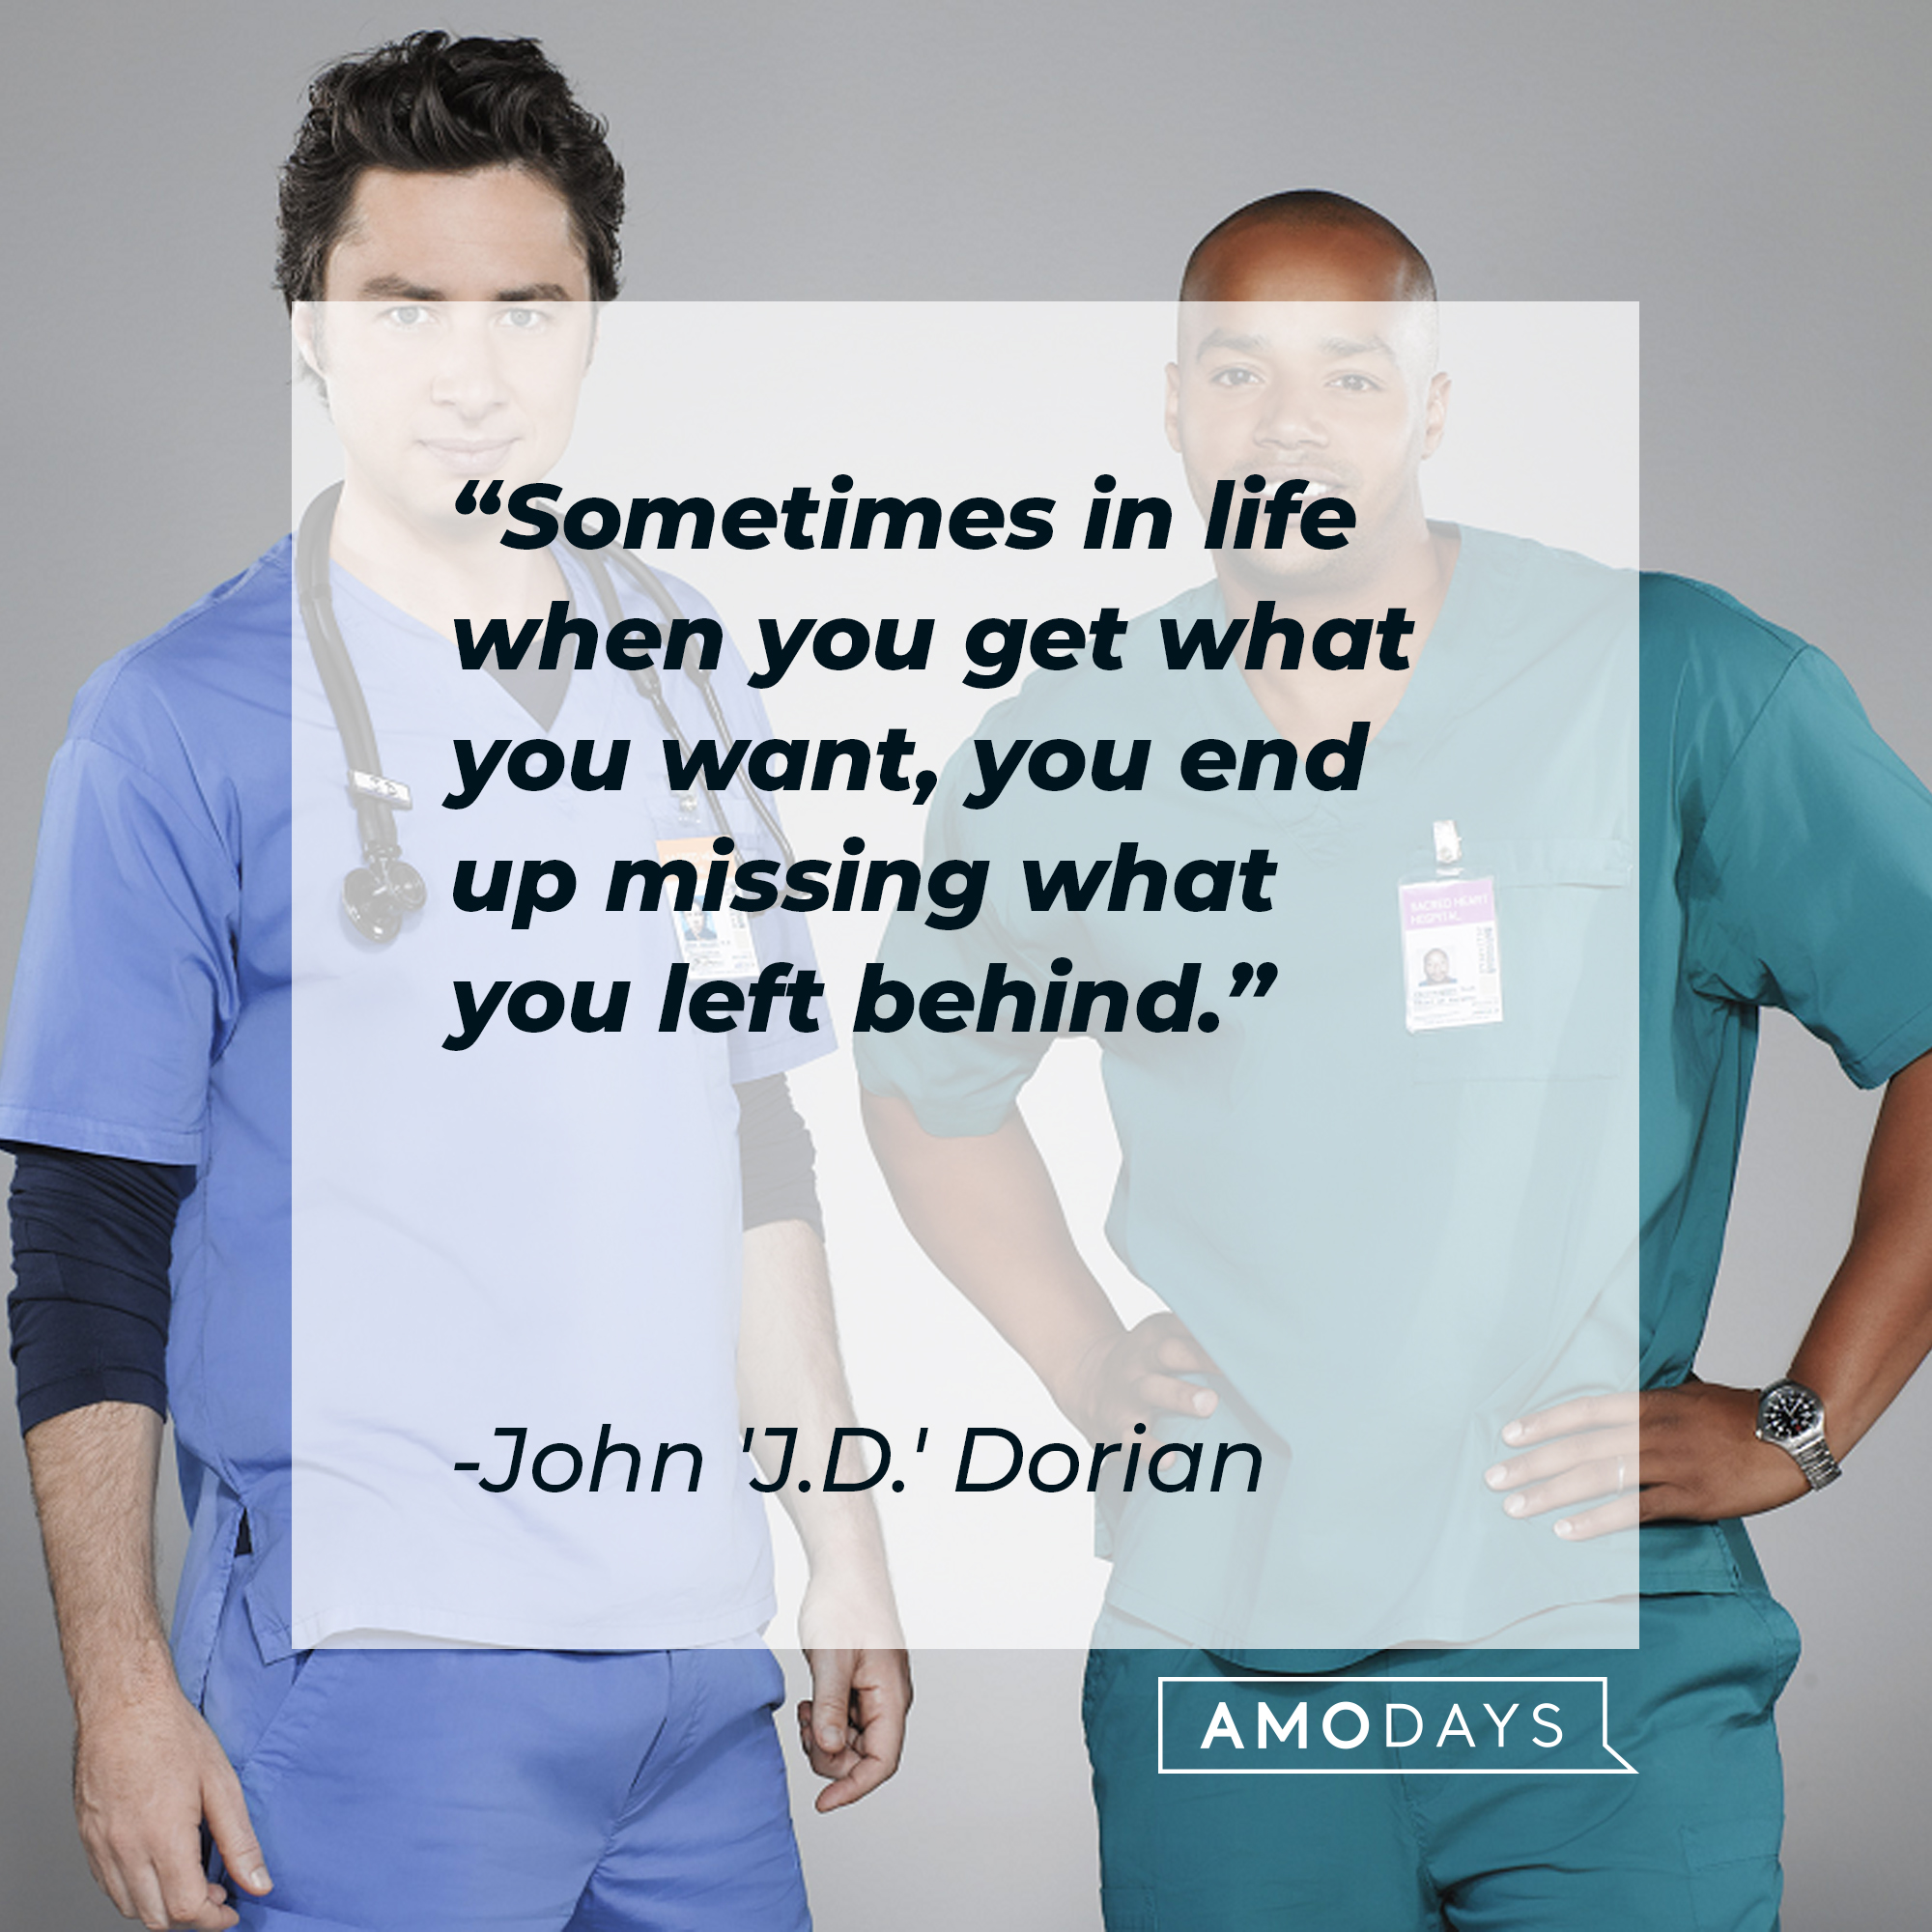 Christoper Turk and John 'J.D.' Dorian with Dorian’s quote: “Sometimes in life when you get what you want, you end up missing what you left behind.” | Source: Facebook.com/scrubs